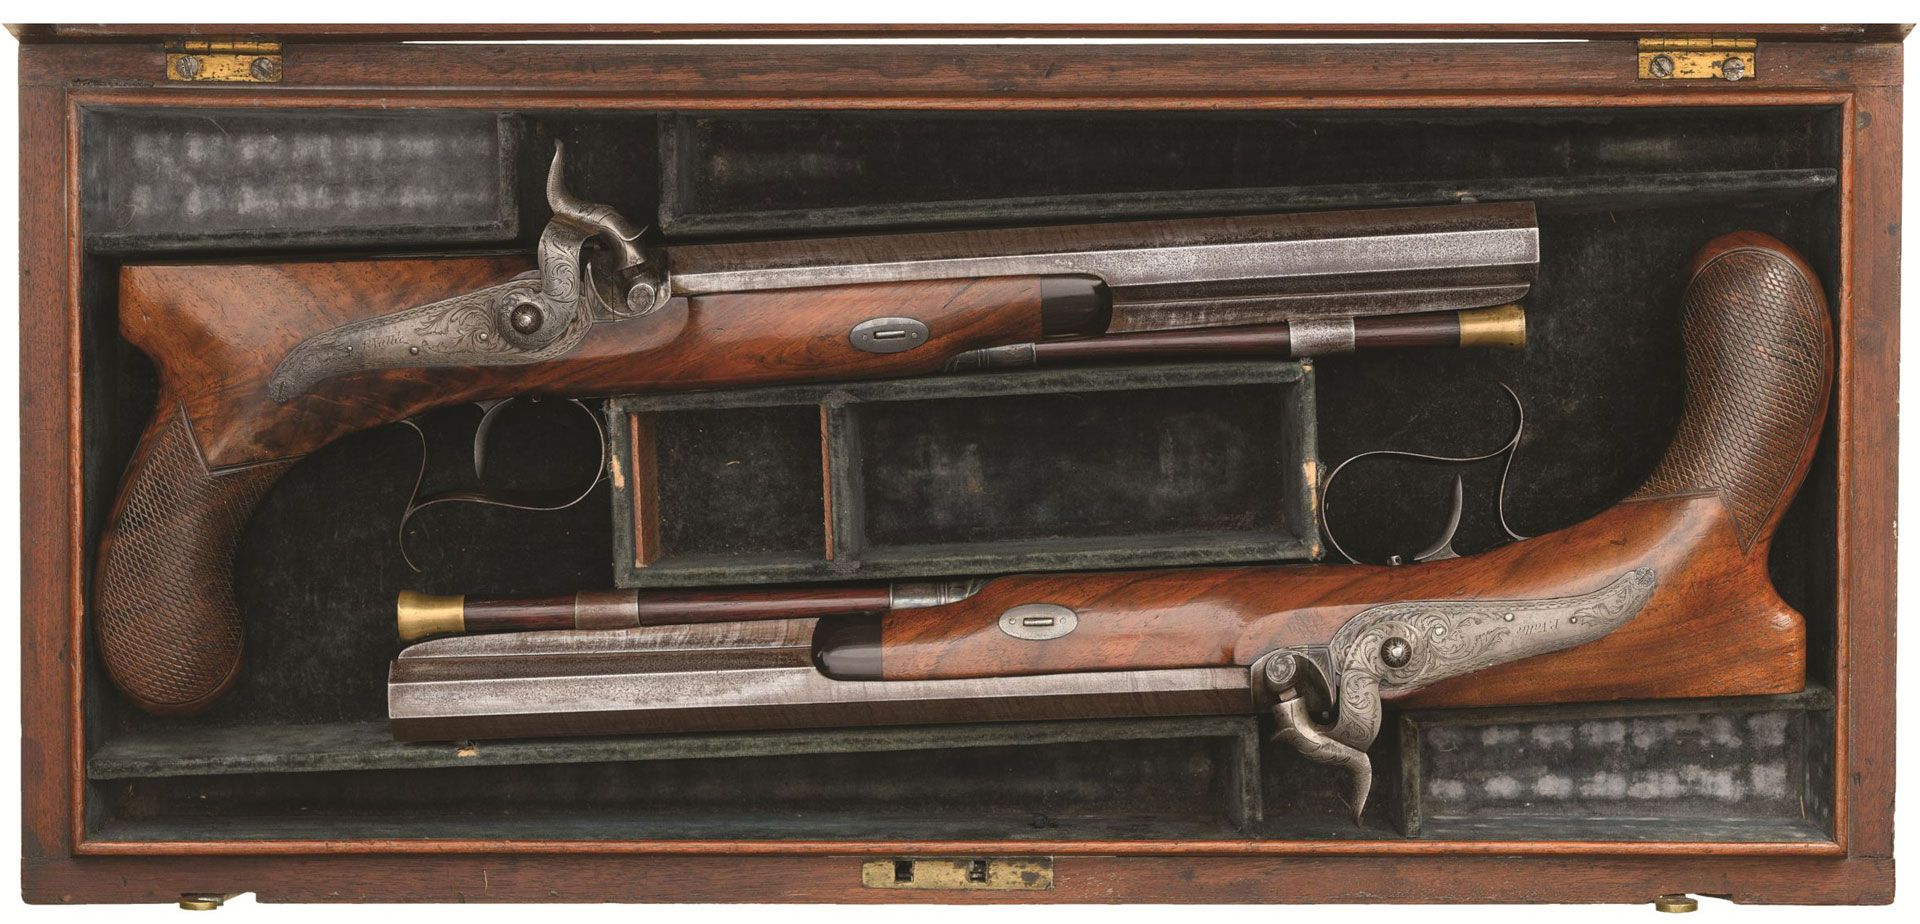 Rare-Cased-Pair-of-American-P.-Vallee-Philadelphia-Marked-Engraved-and-Gold-Inlaid-Saw-Handle-Percussion-Dueling-Pistols-with-Inscribed-Case-1